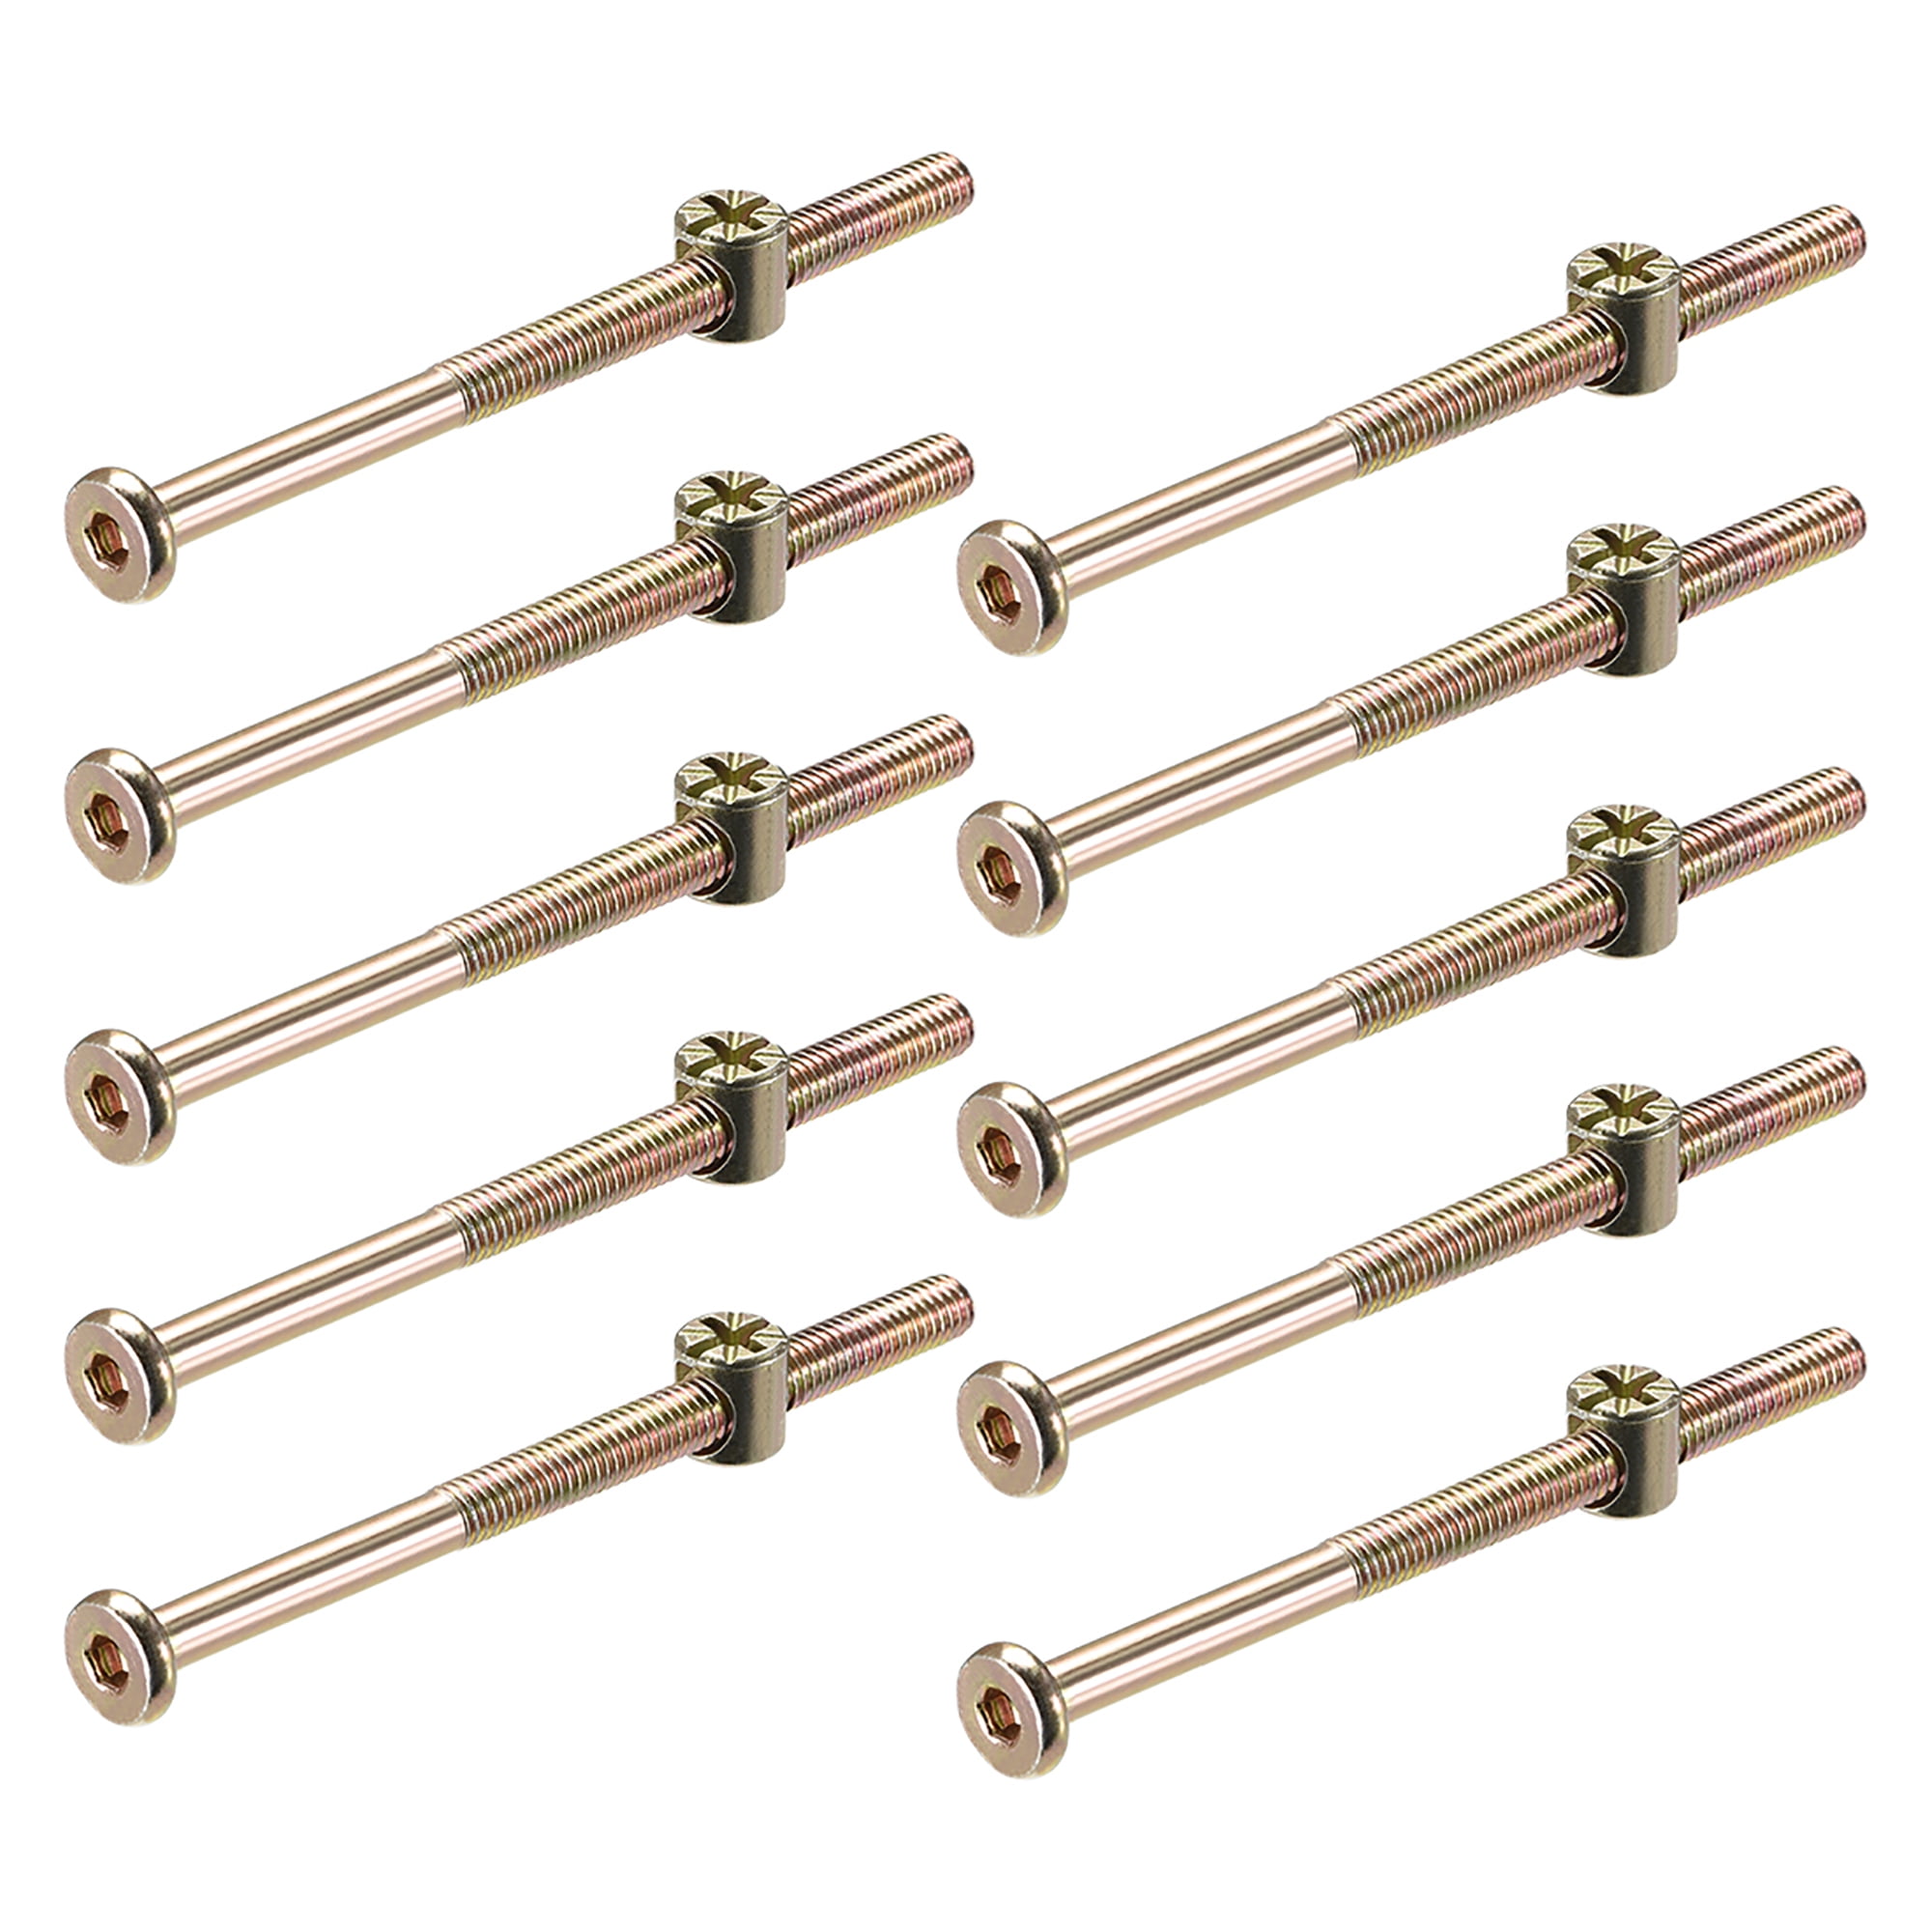 M6 x 90mm Furniture Bolts Nut Set Hex Socket Screw with Barrel Nuts Phillips-Slotted Zinc Plated 10 Sets 